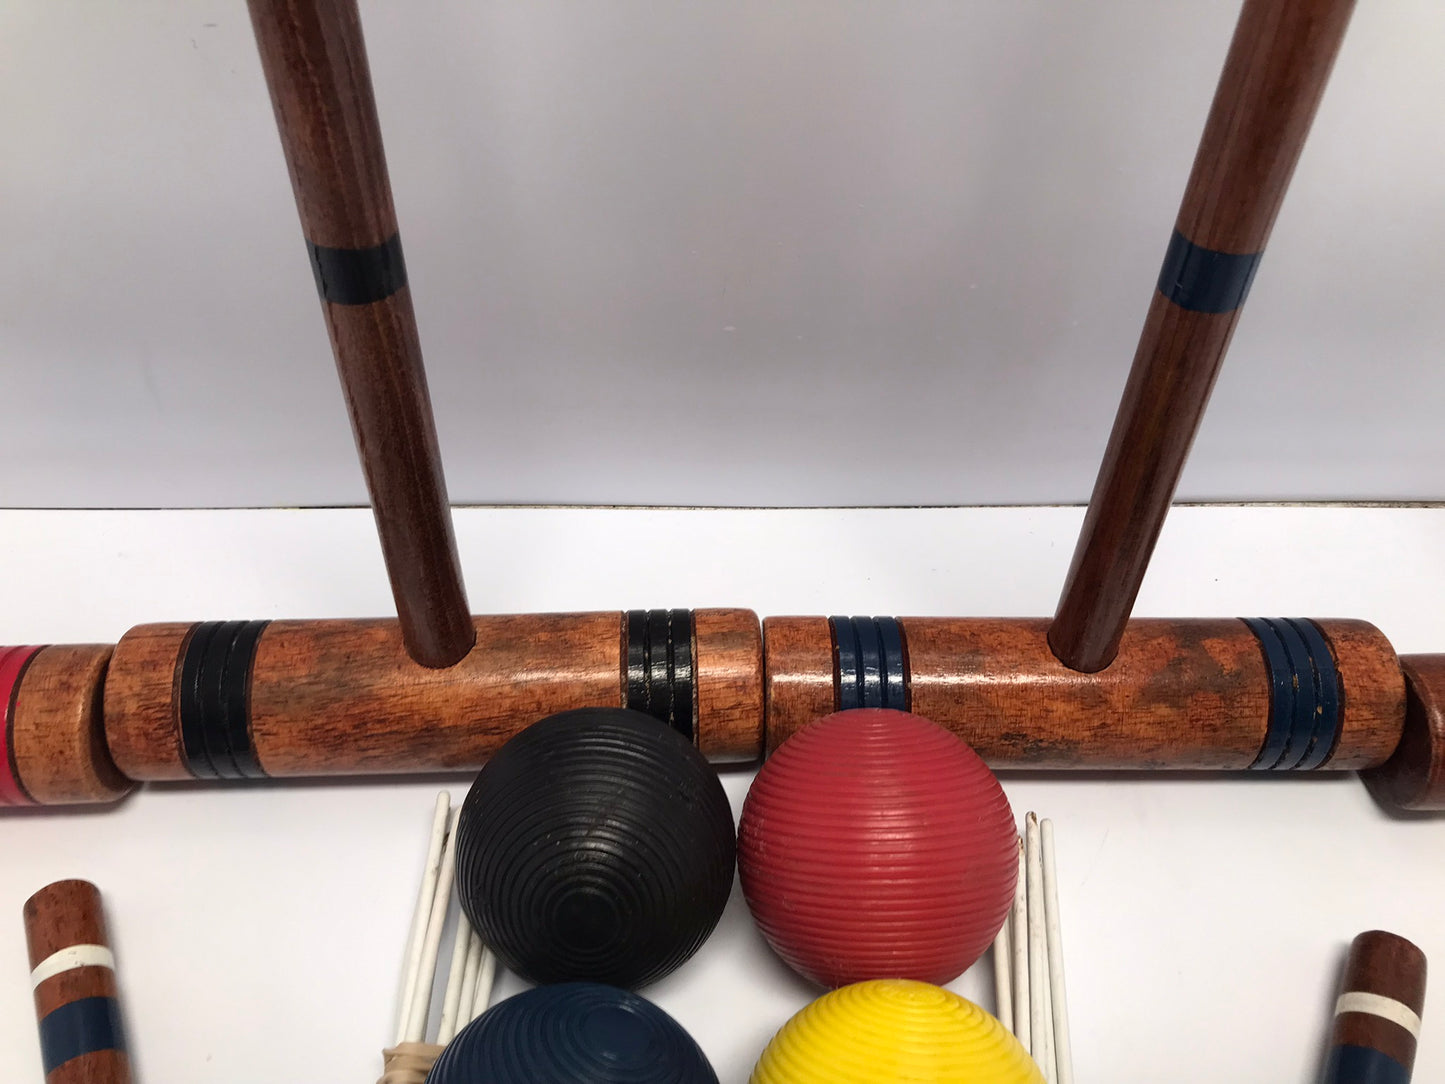 Croquet Outdoor Toys Game Complete Wooden Family Set